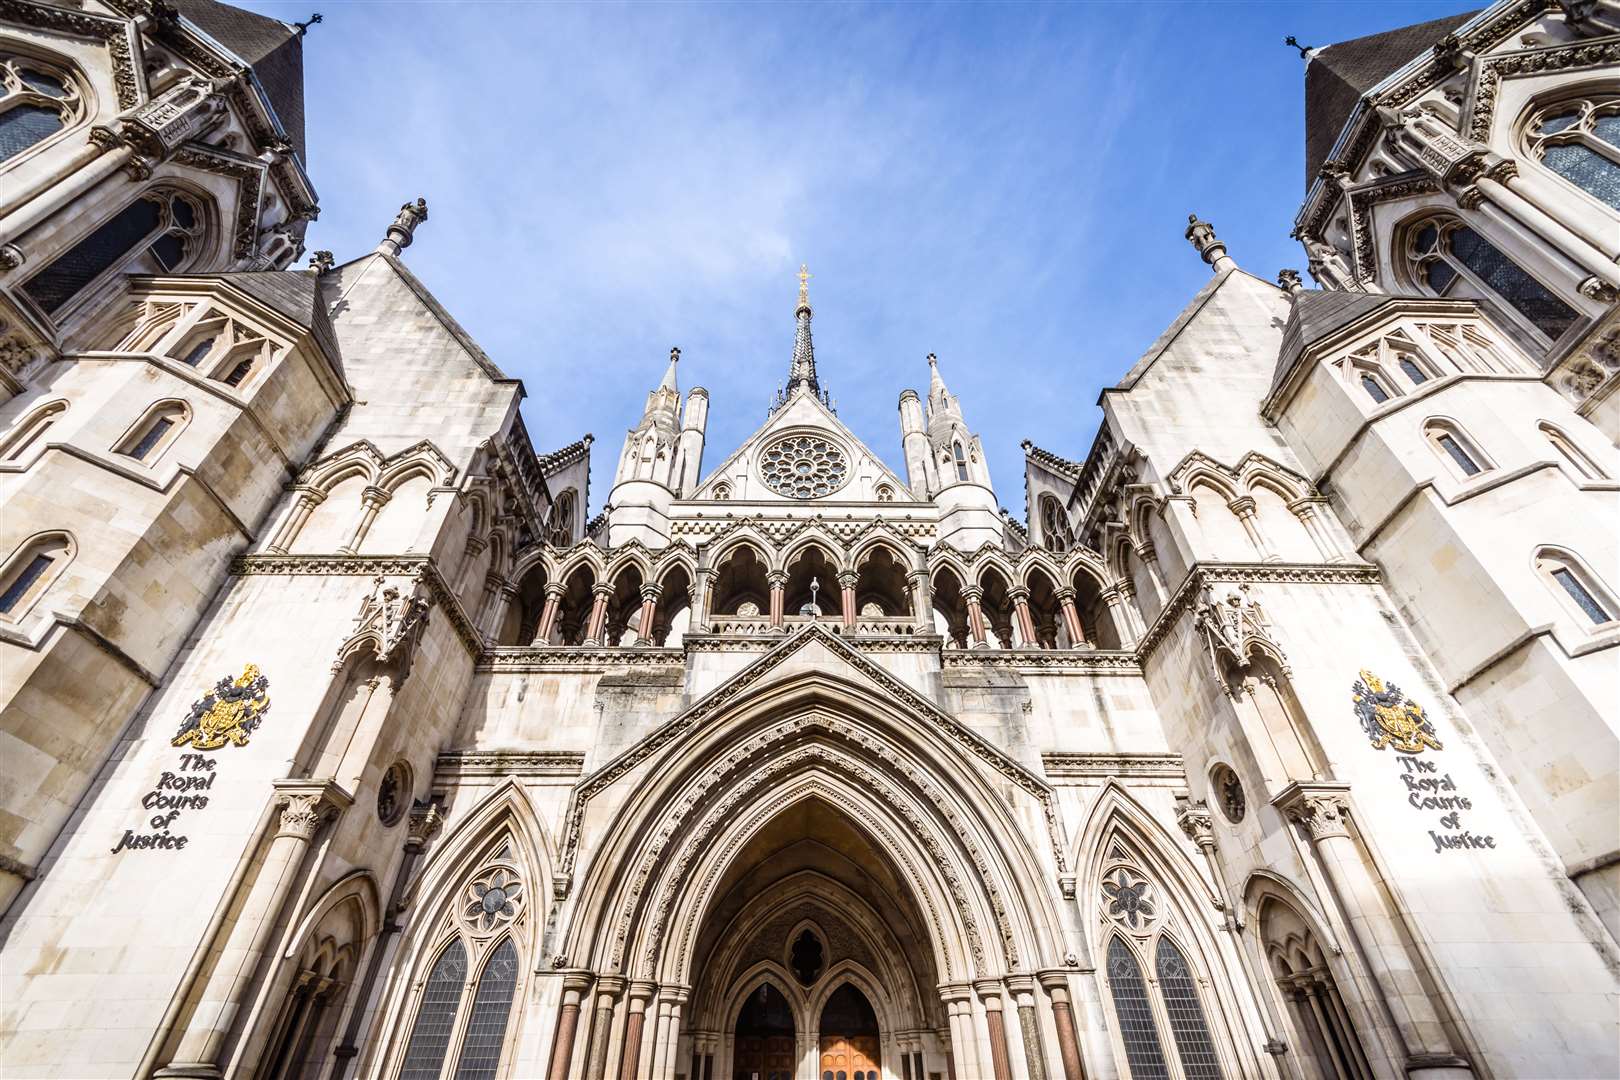 The Royal Courts of Justice, located in Westminster, houses the High Court and Court of Appeal of England and Wales